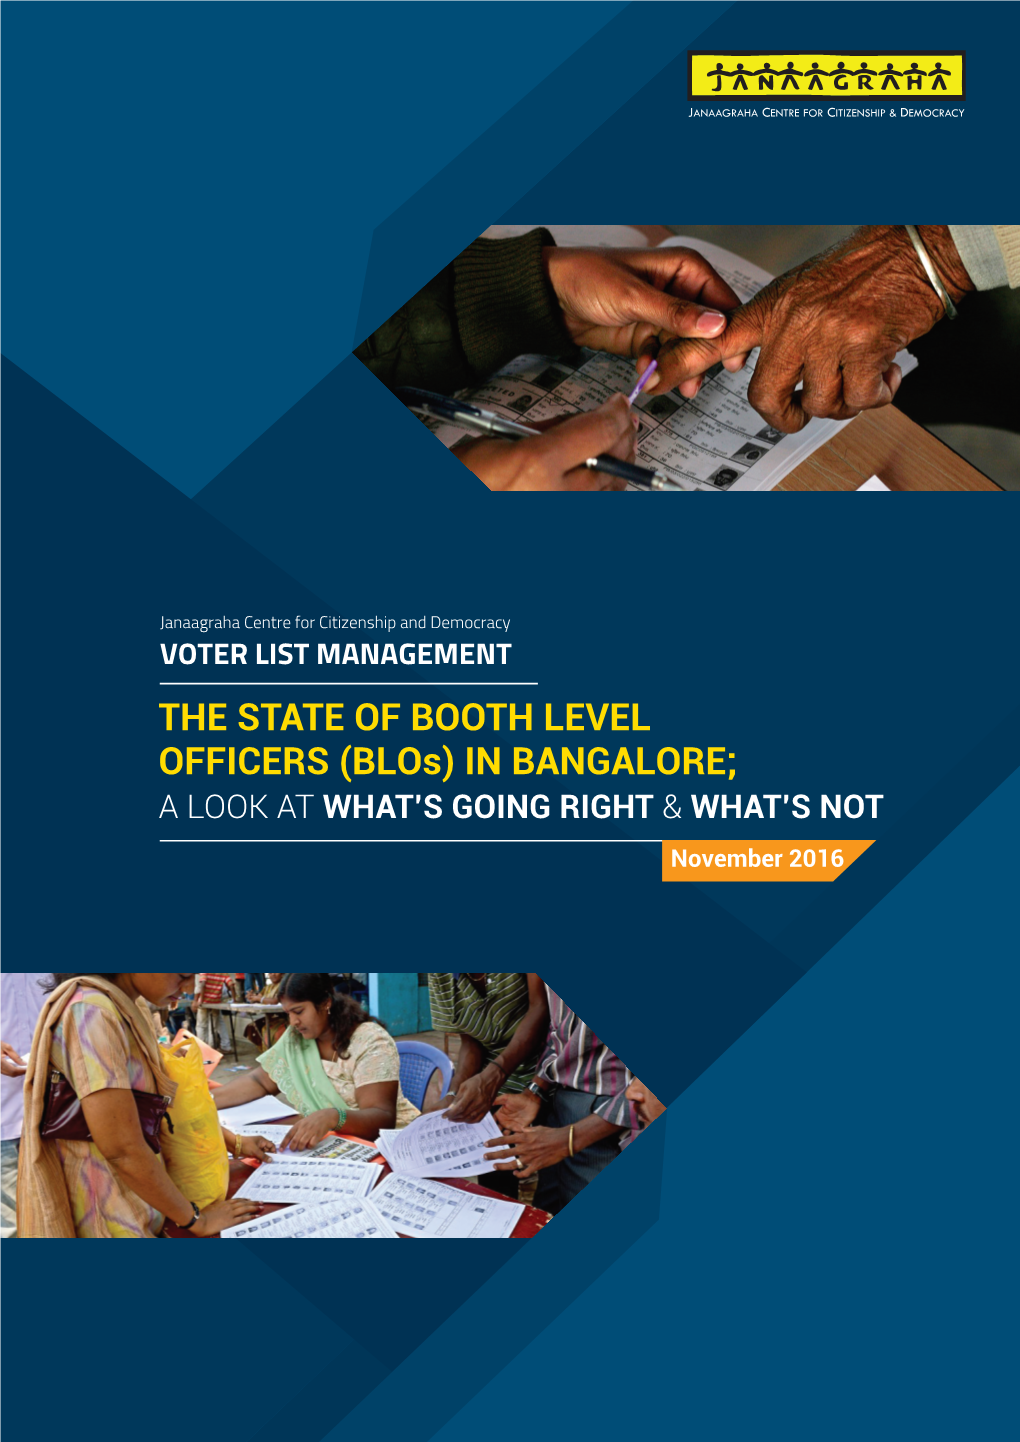 THE STATE of BOOTH LEVEL OFFICERS (Blos) in BANGALORE; a LOOK at WHAT’S GOING RIGHT & WHAT’S NOT November 2016